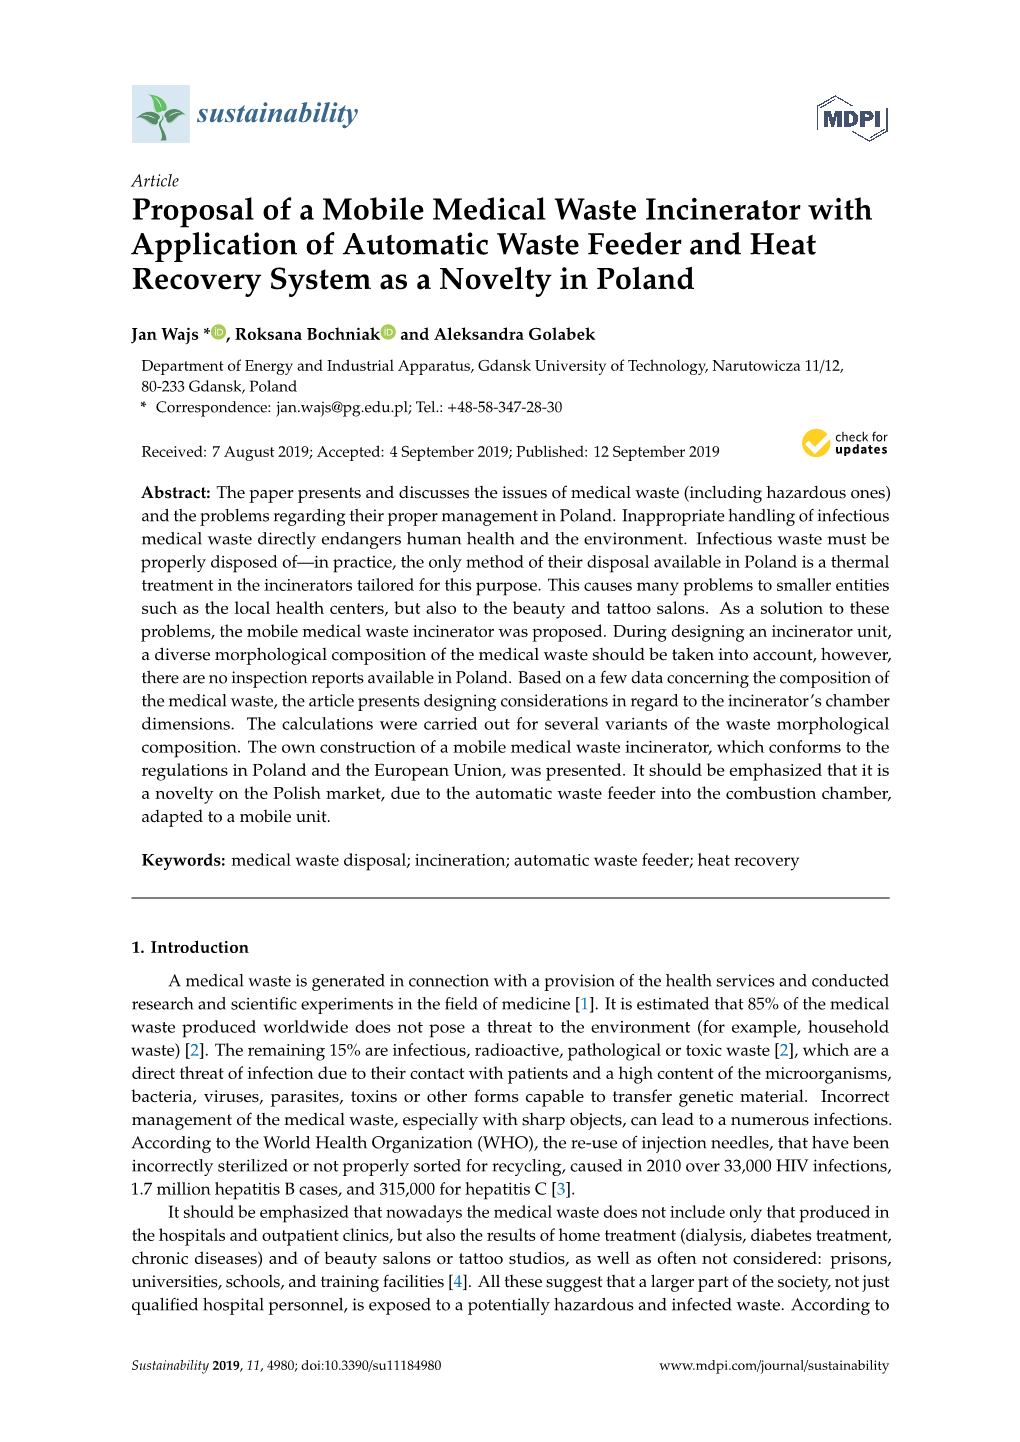 Proposal of a Mobile Medical Waste Incinerator with Application of Automatic Waste Feeder and Heat Recovery System As a Novelty in Poland